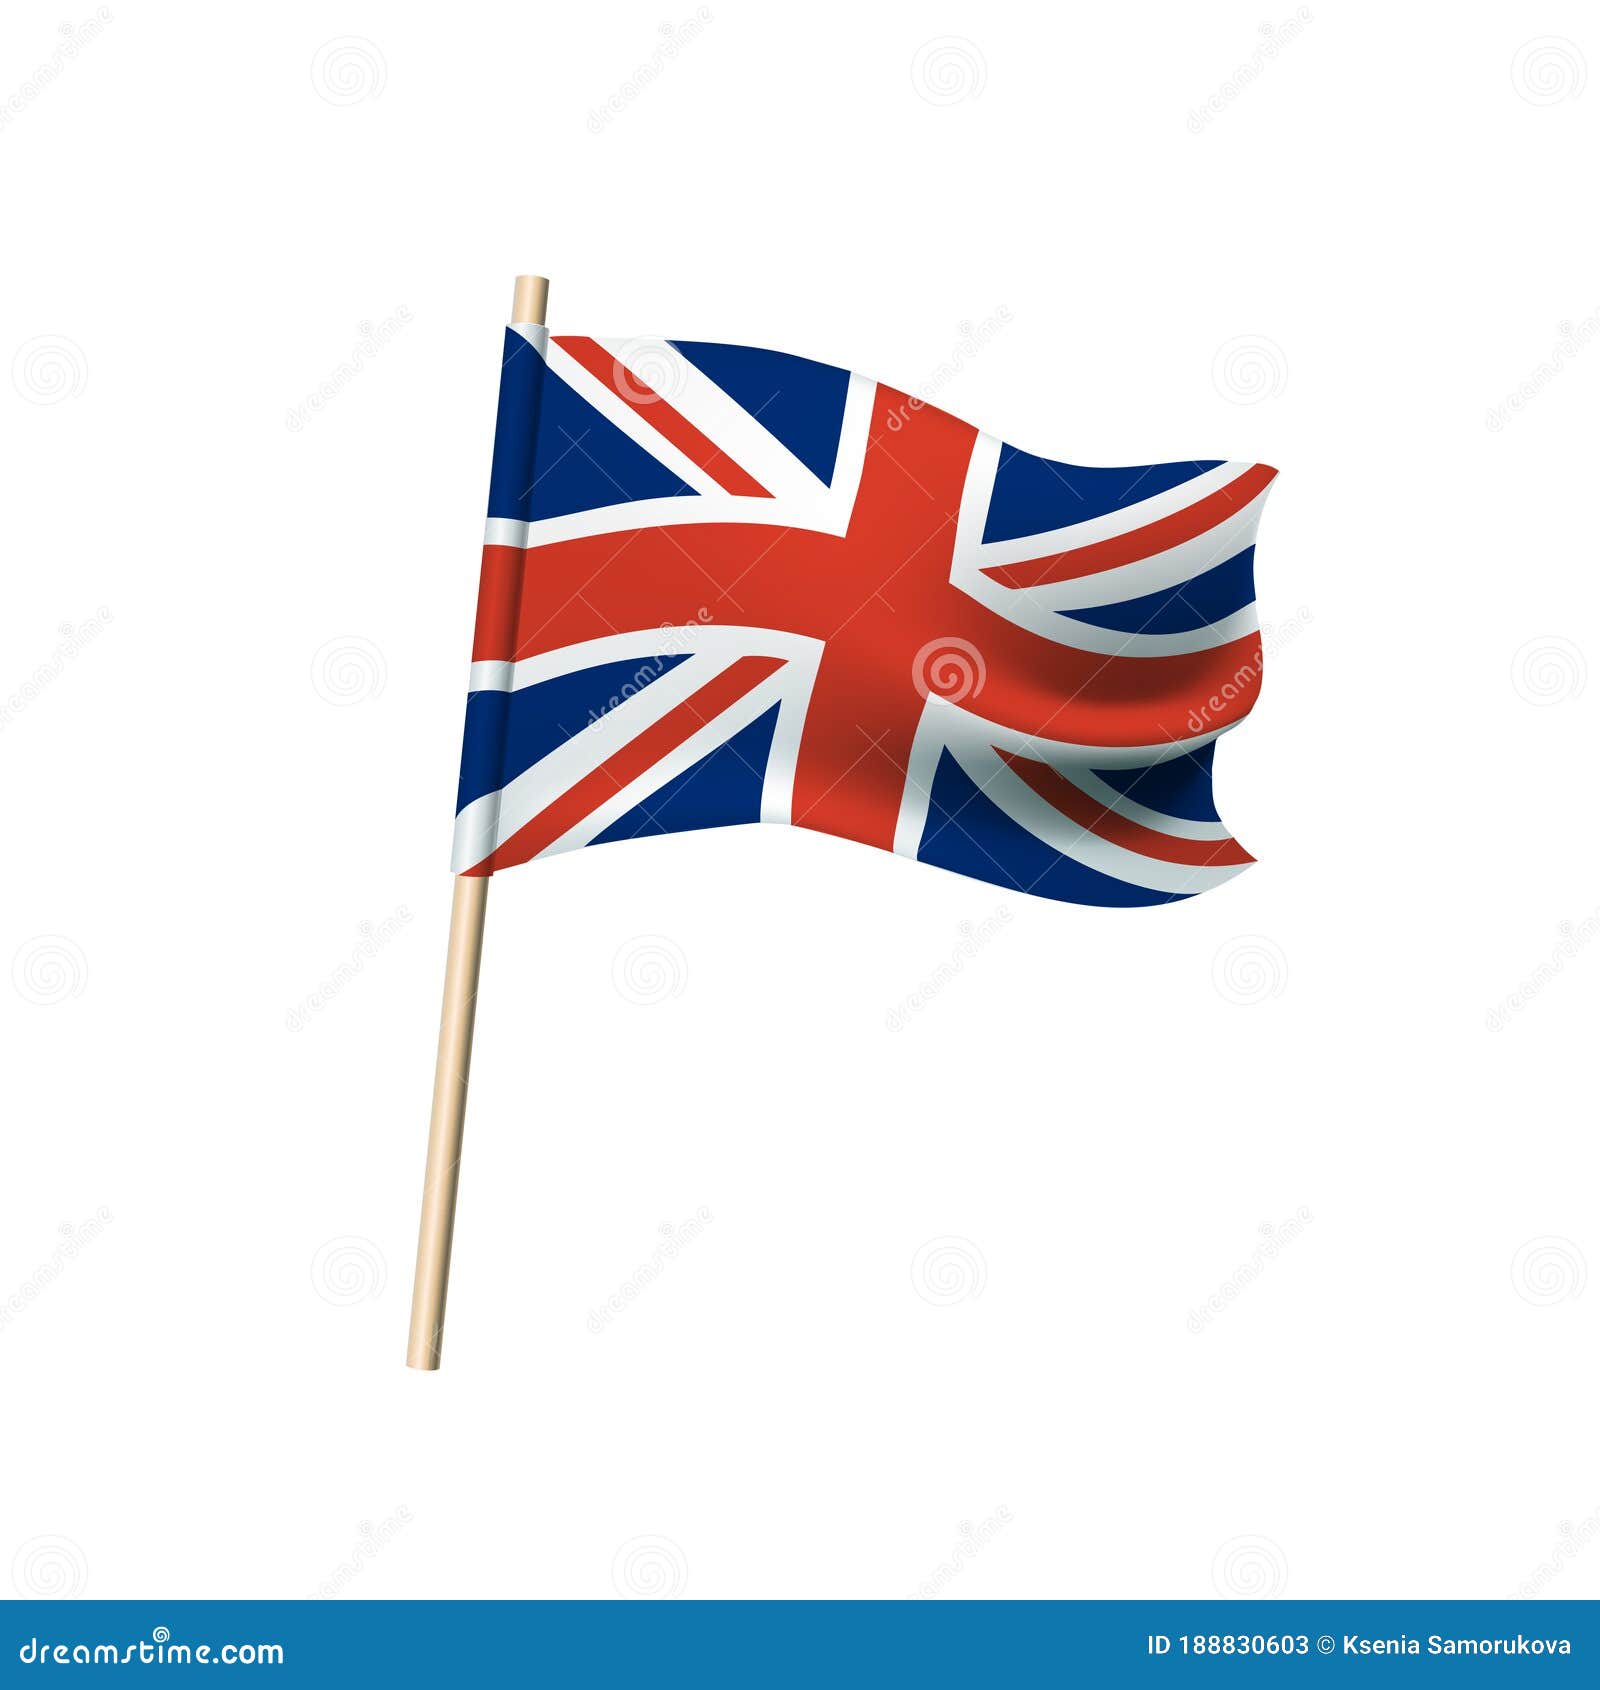 Great Britain Flag, Red And White Cross On Blue Background Stock Vector -  Illustration of icon, layers: 188830603